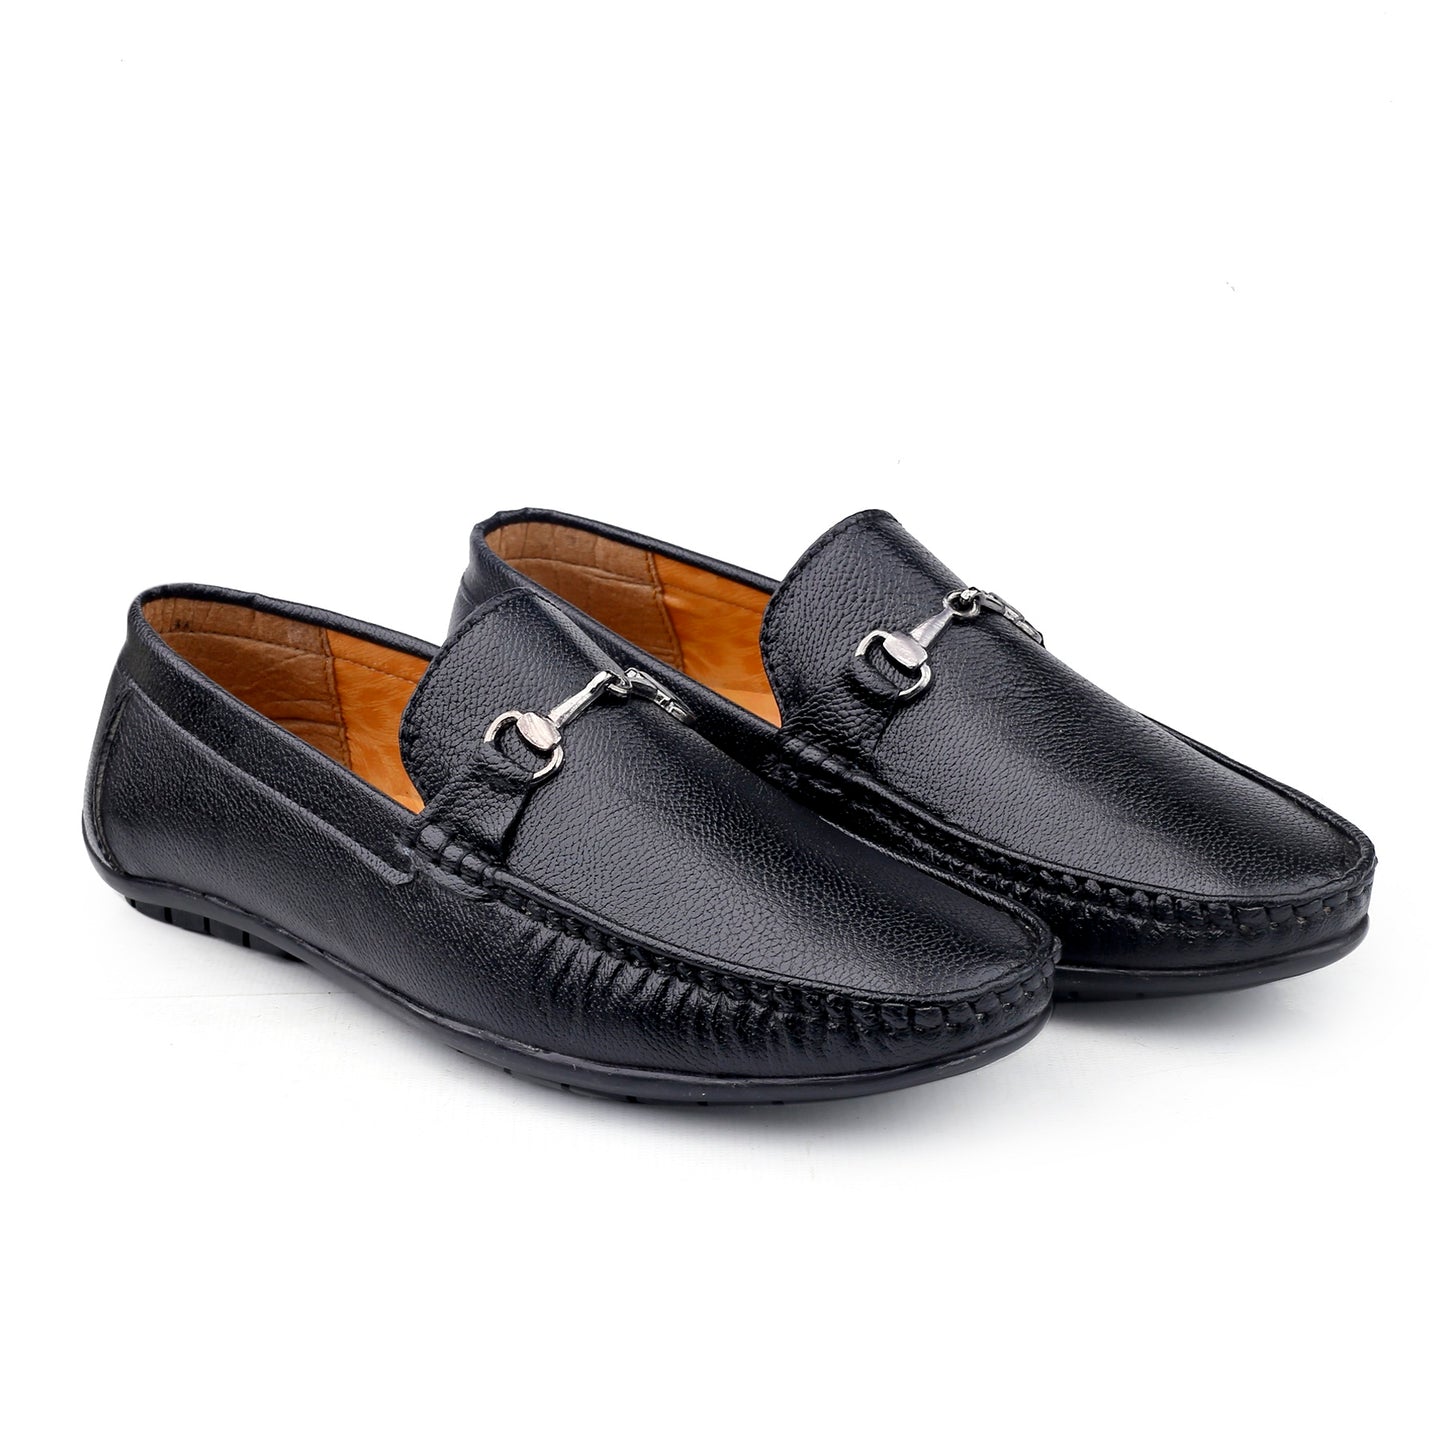 Bxxy Stylish Premium Vegan Leather Casual Loafer Shoes for all Season